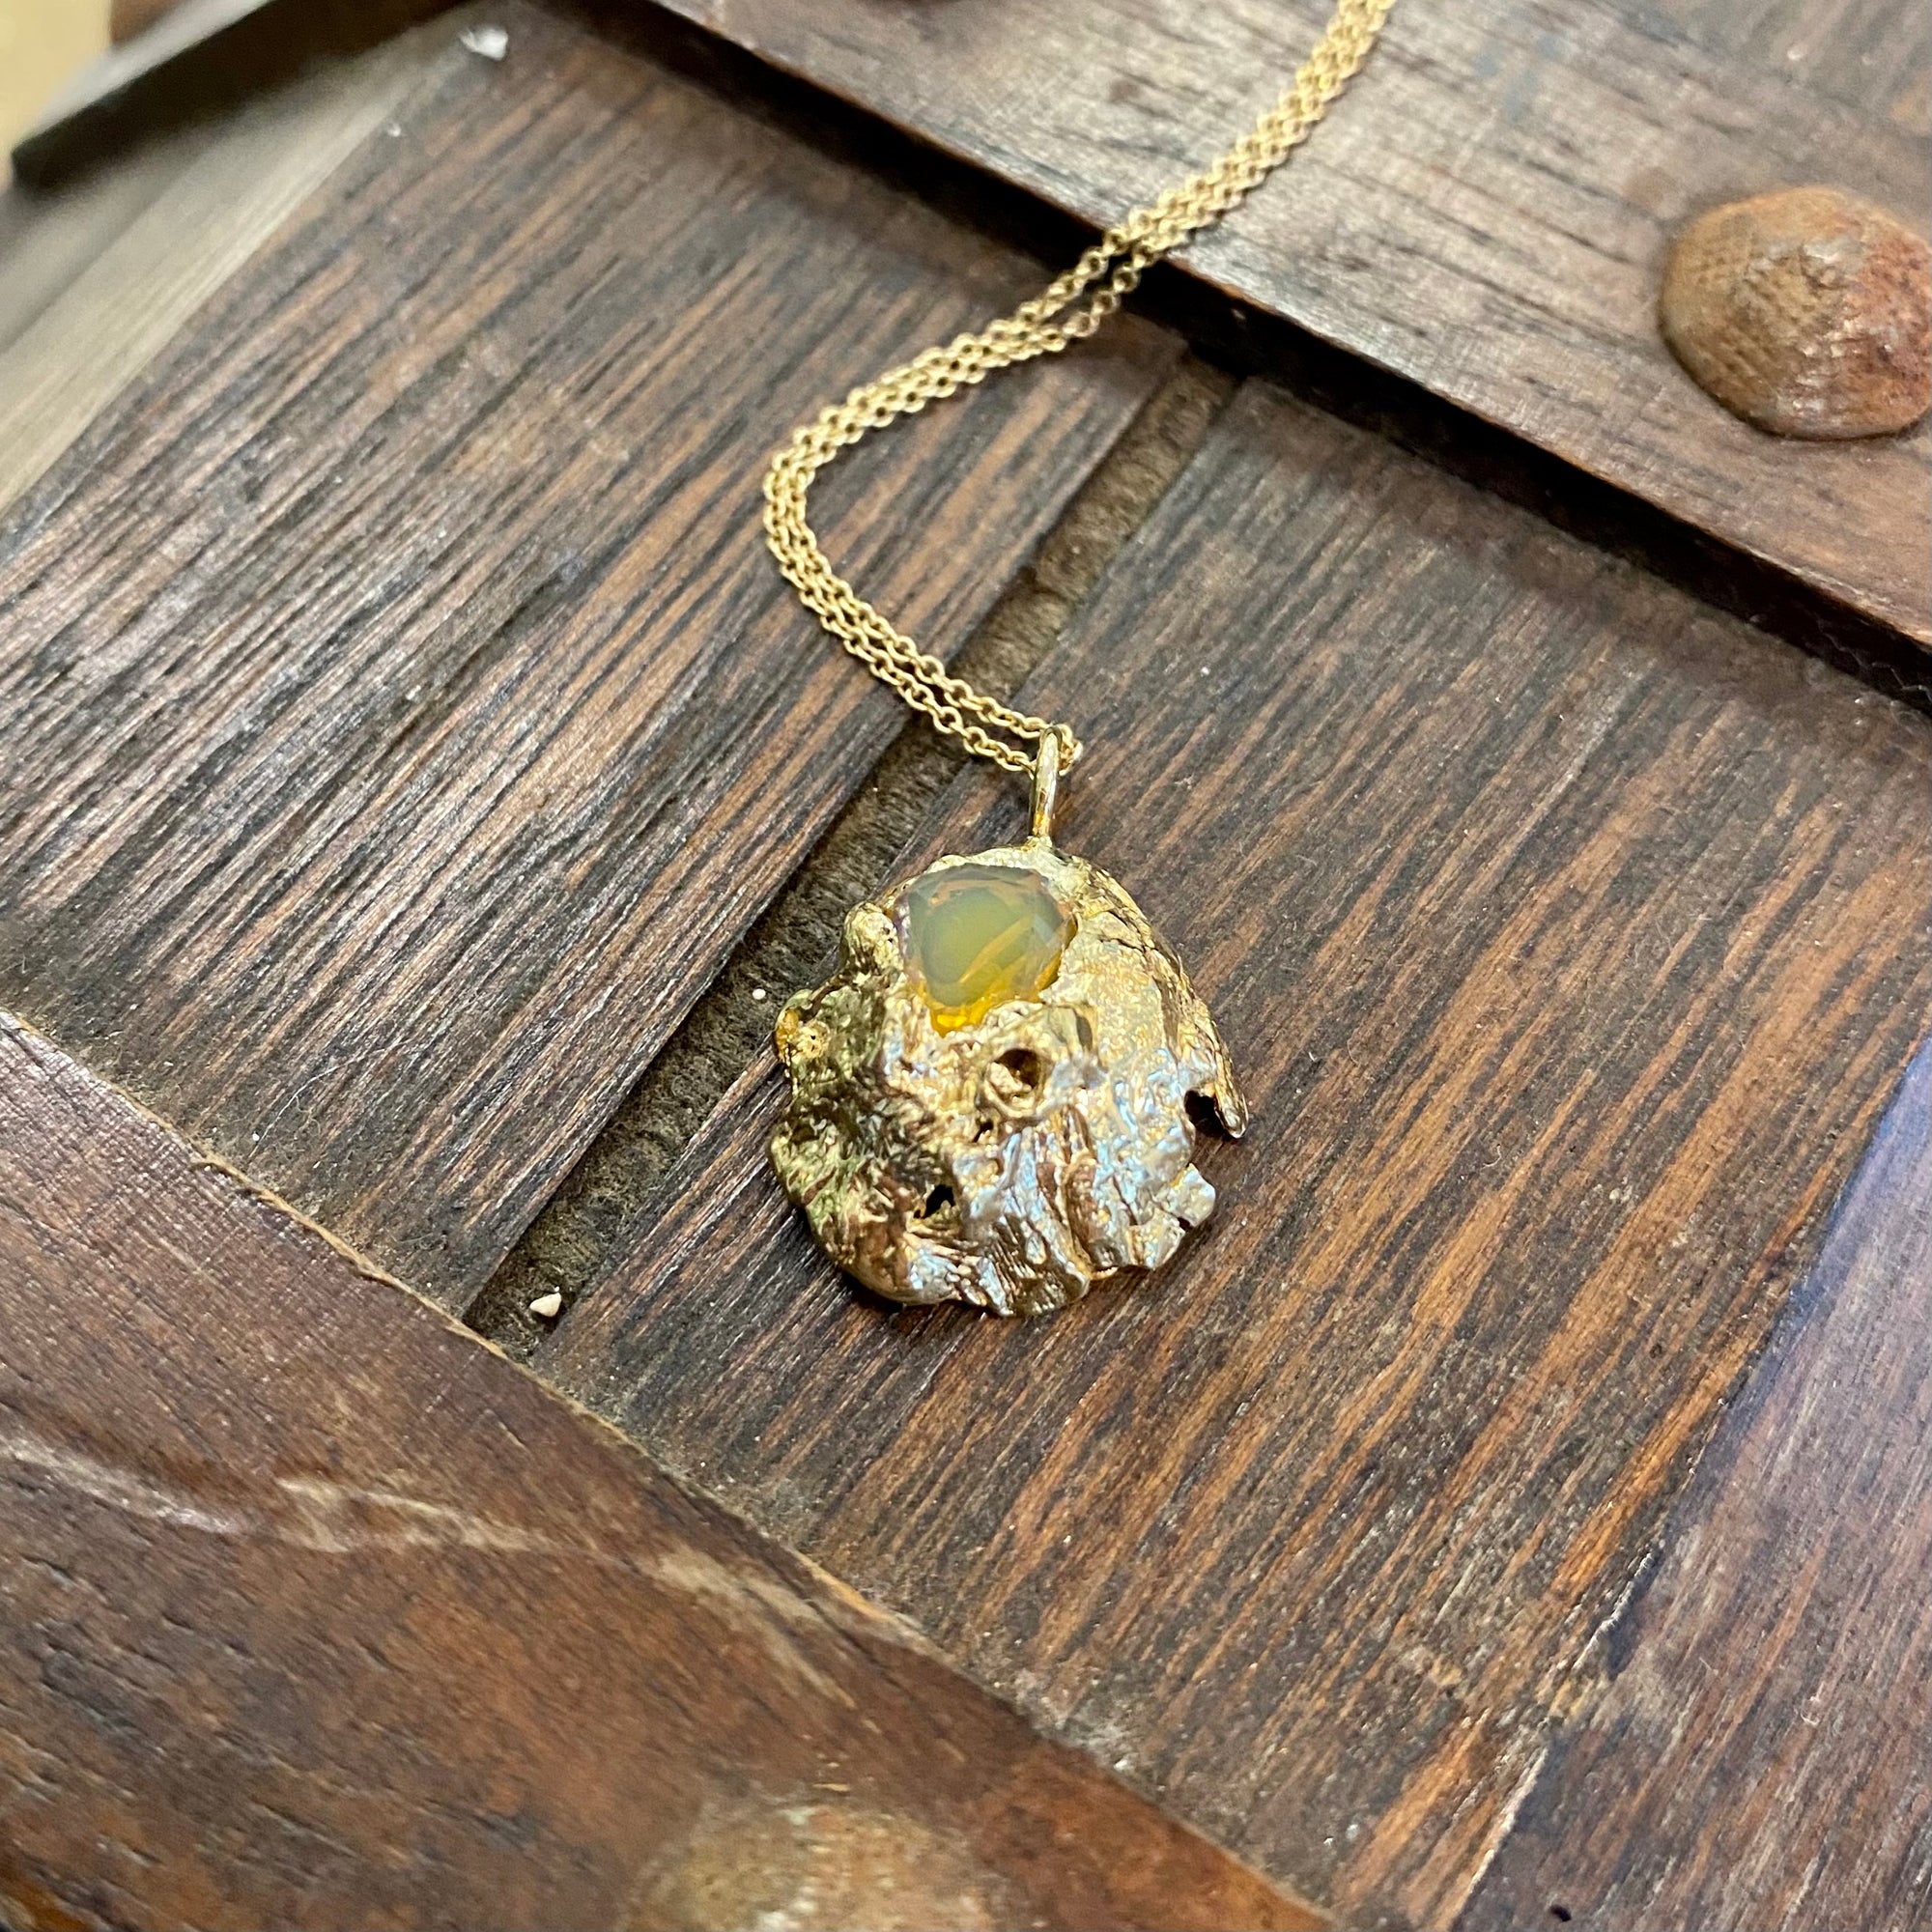 RING-OF-FIRE Ethiopian Opal and Garnet Necklace